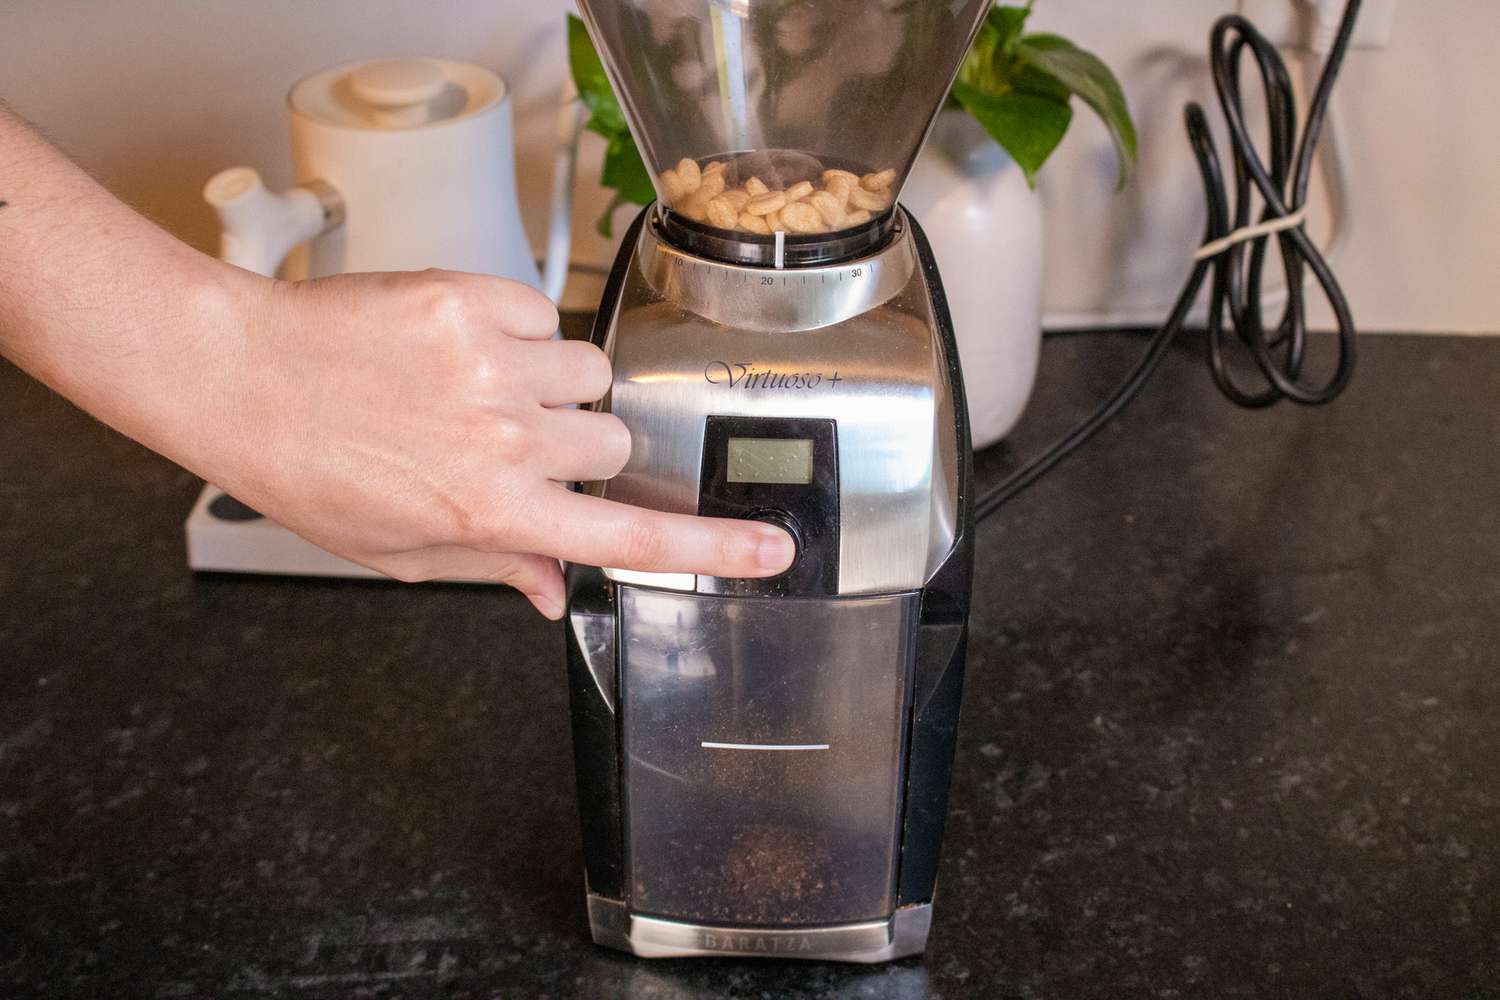 A hand pressing down on the start button a coffee grinder